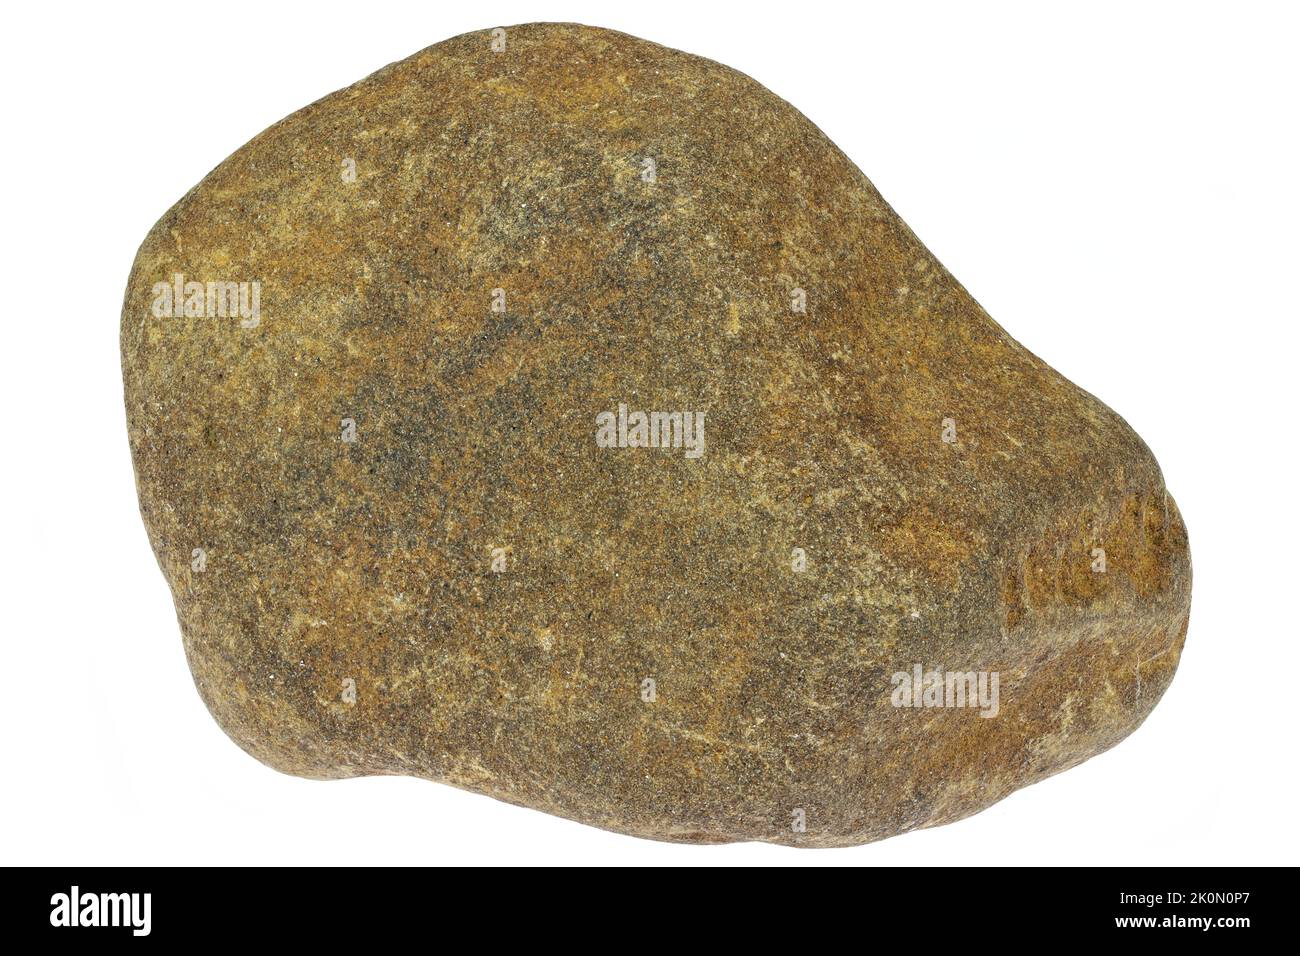 limonite sandstone from the Baltic Sea coast in Waabs, Germany isolated on white background Stock Photo